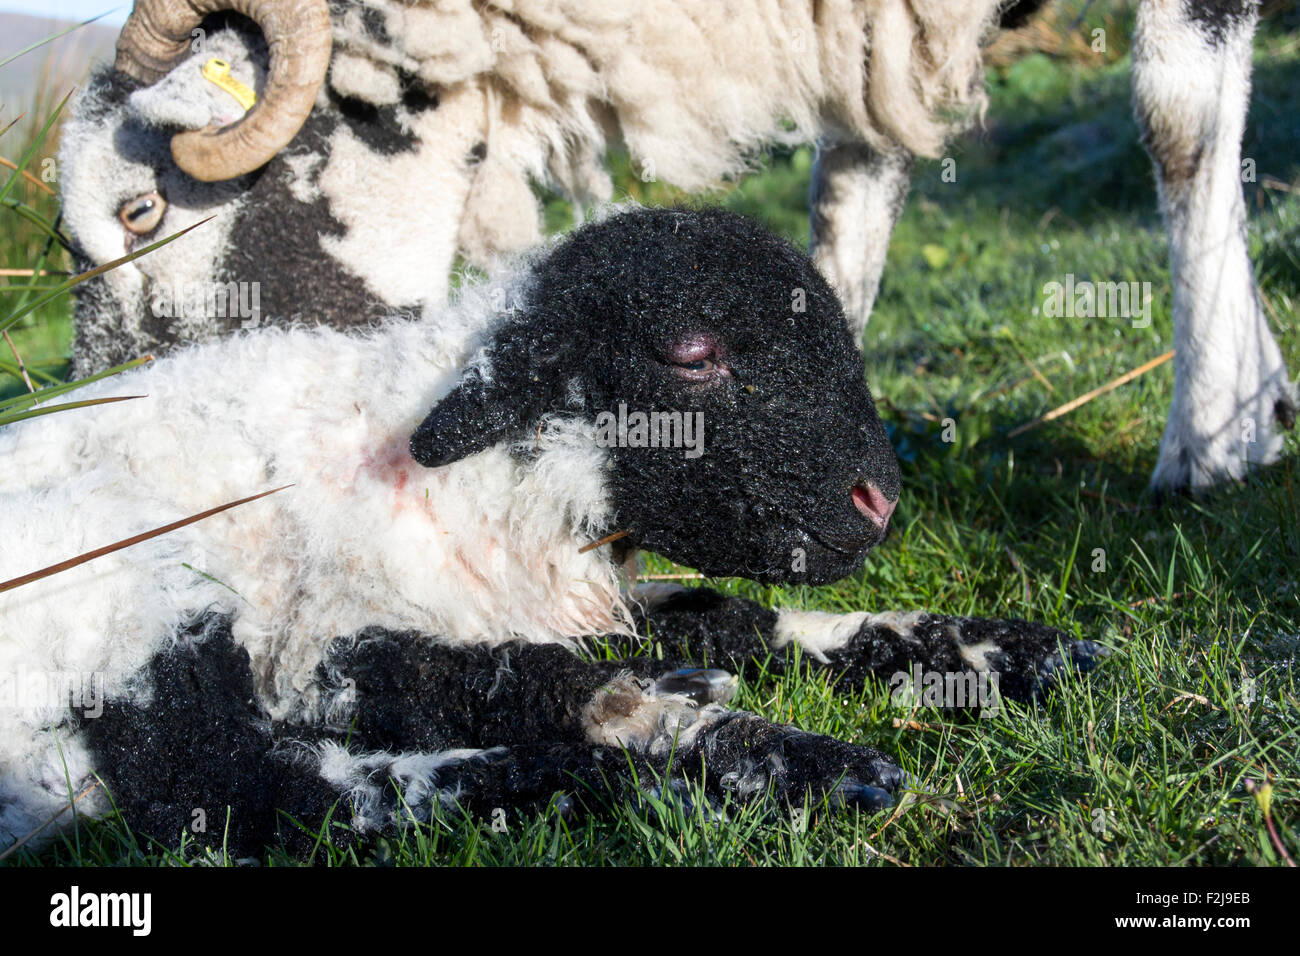 Lamb with swollen head due to being born with a front leg back, restricting the natural birth process. Stock Photo